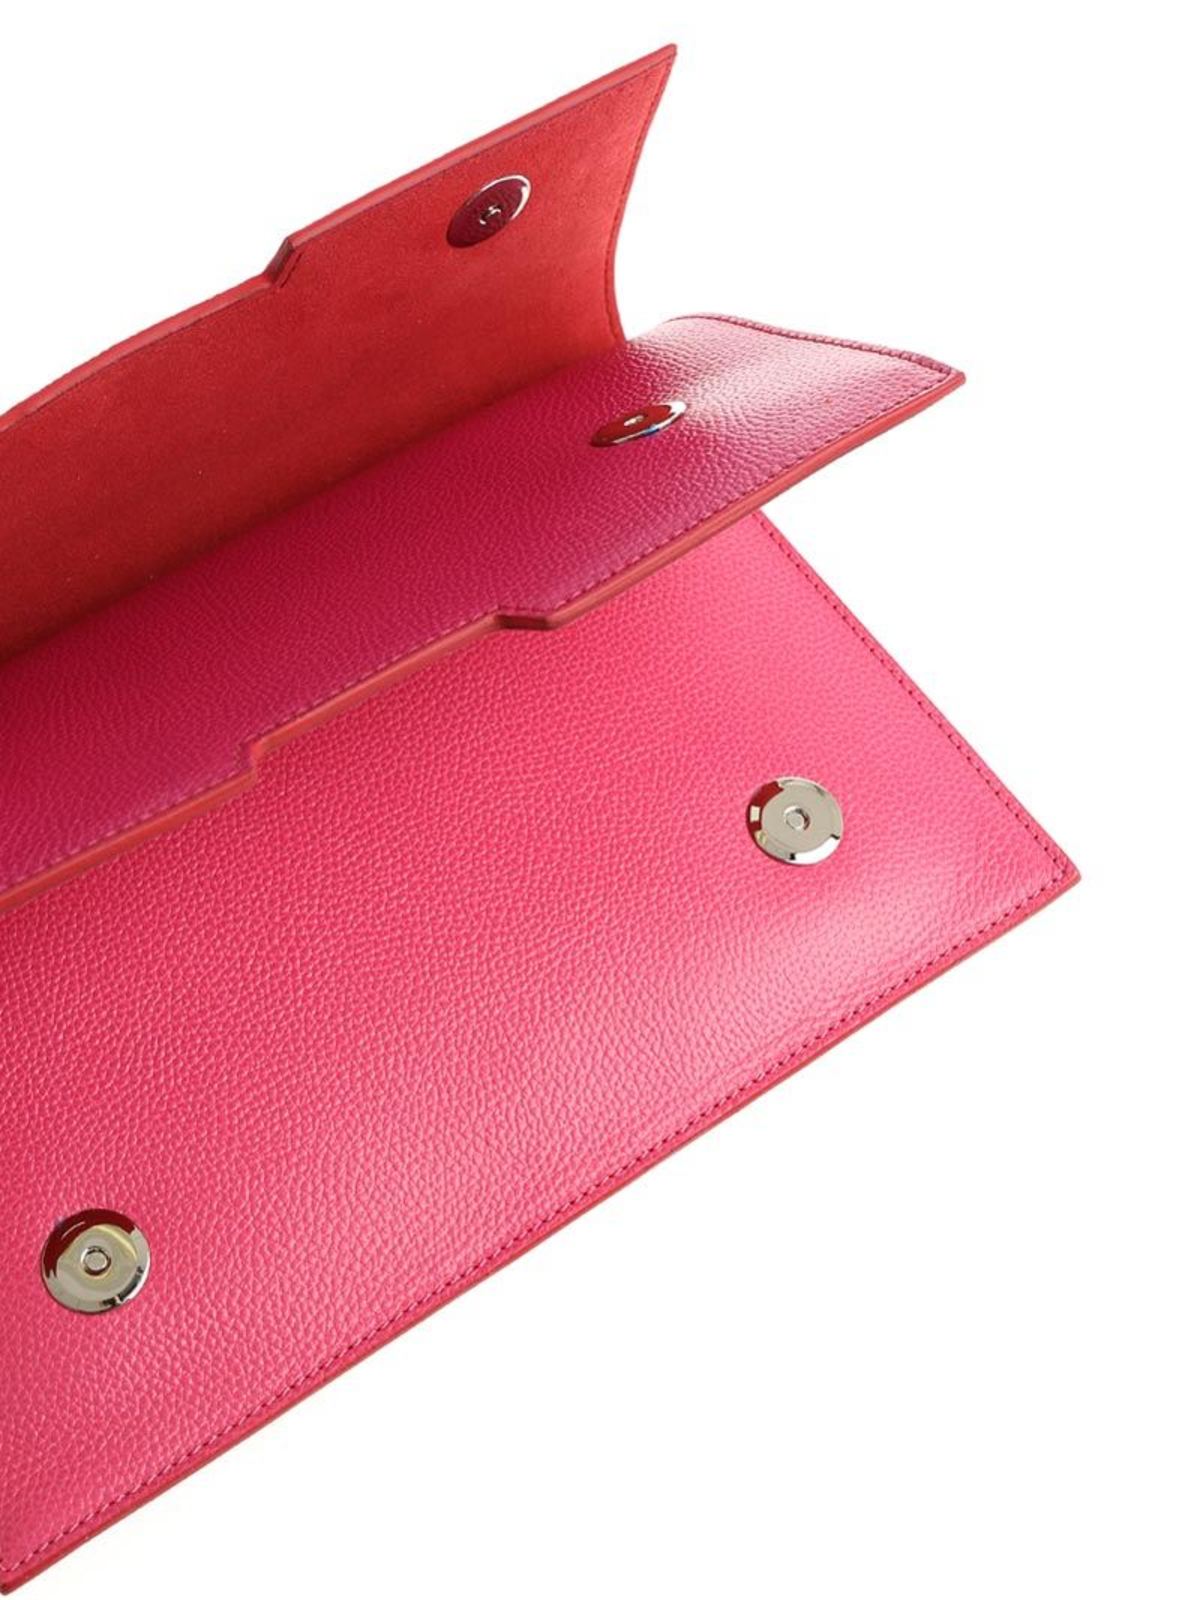 Shop Vivienne Westwood Anglomania Grainy Leather Clutch In Rosado